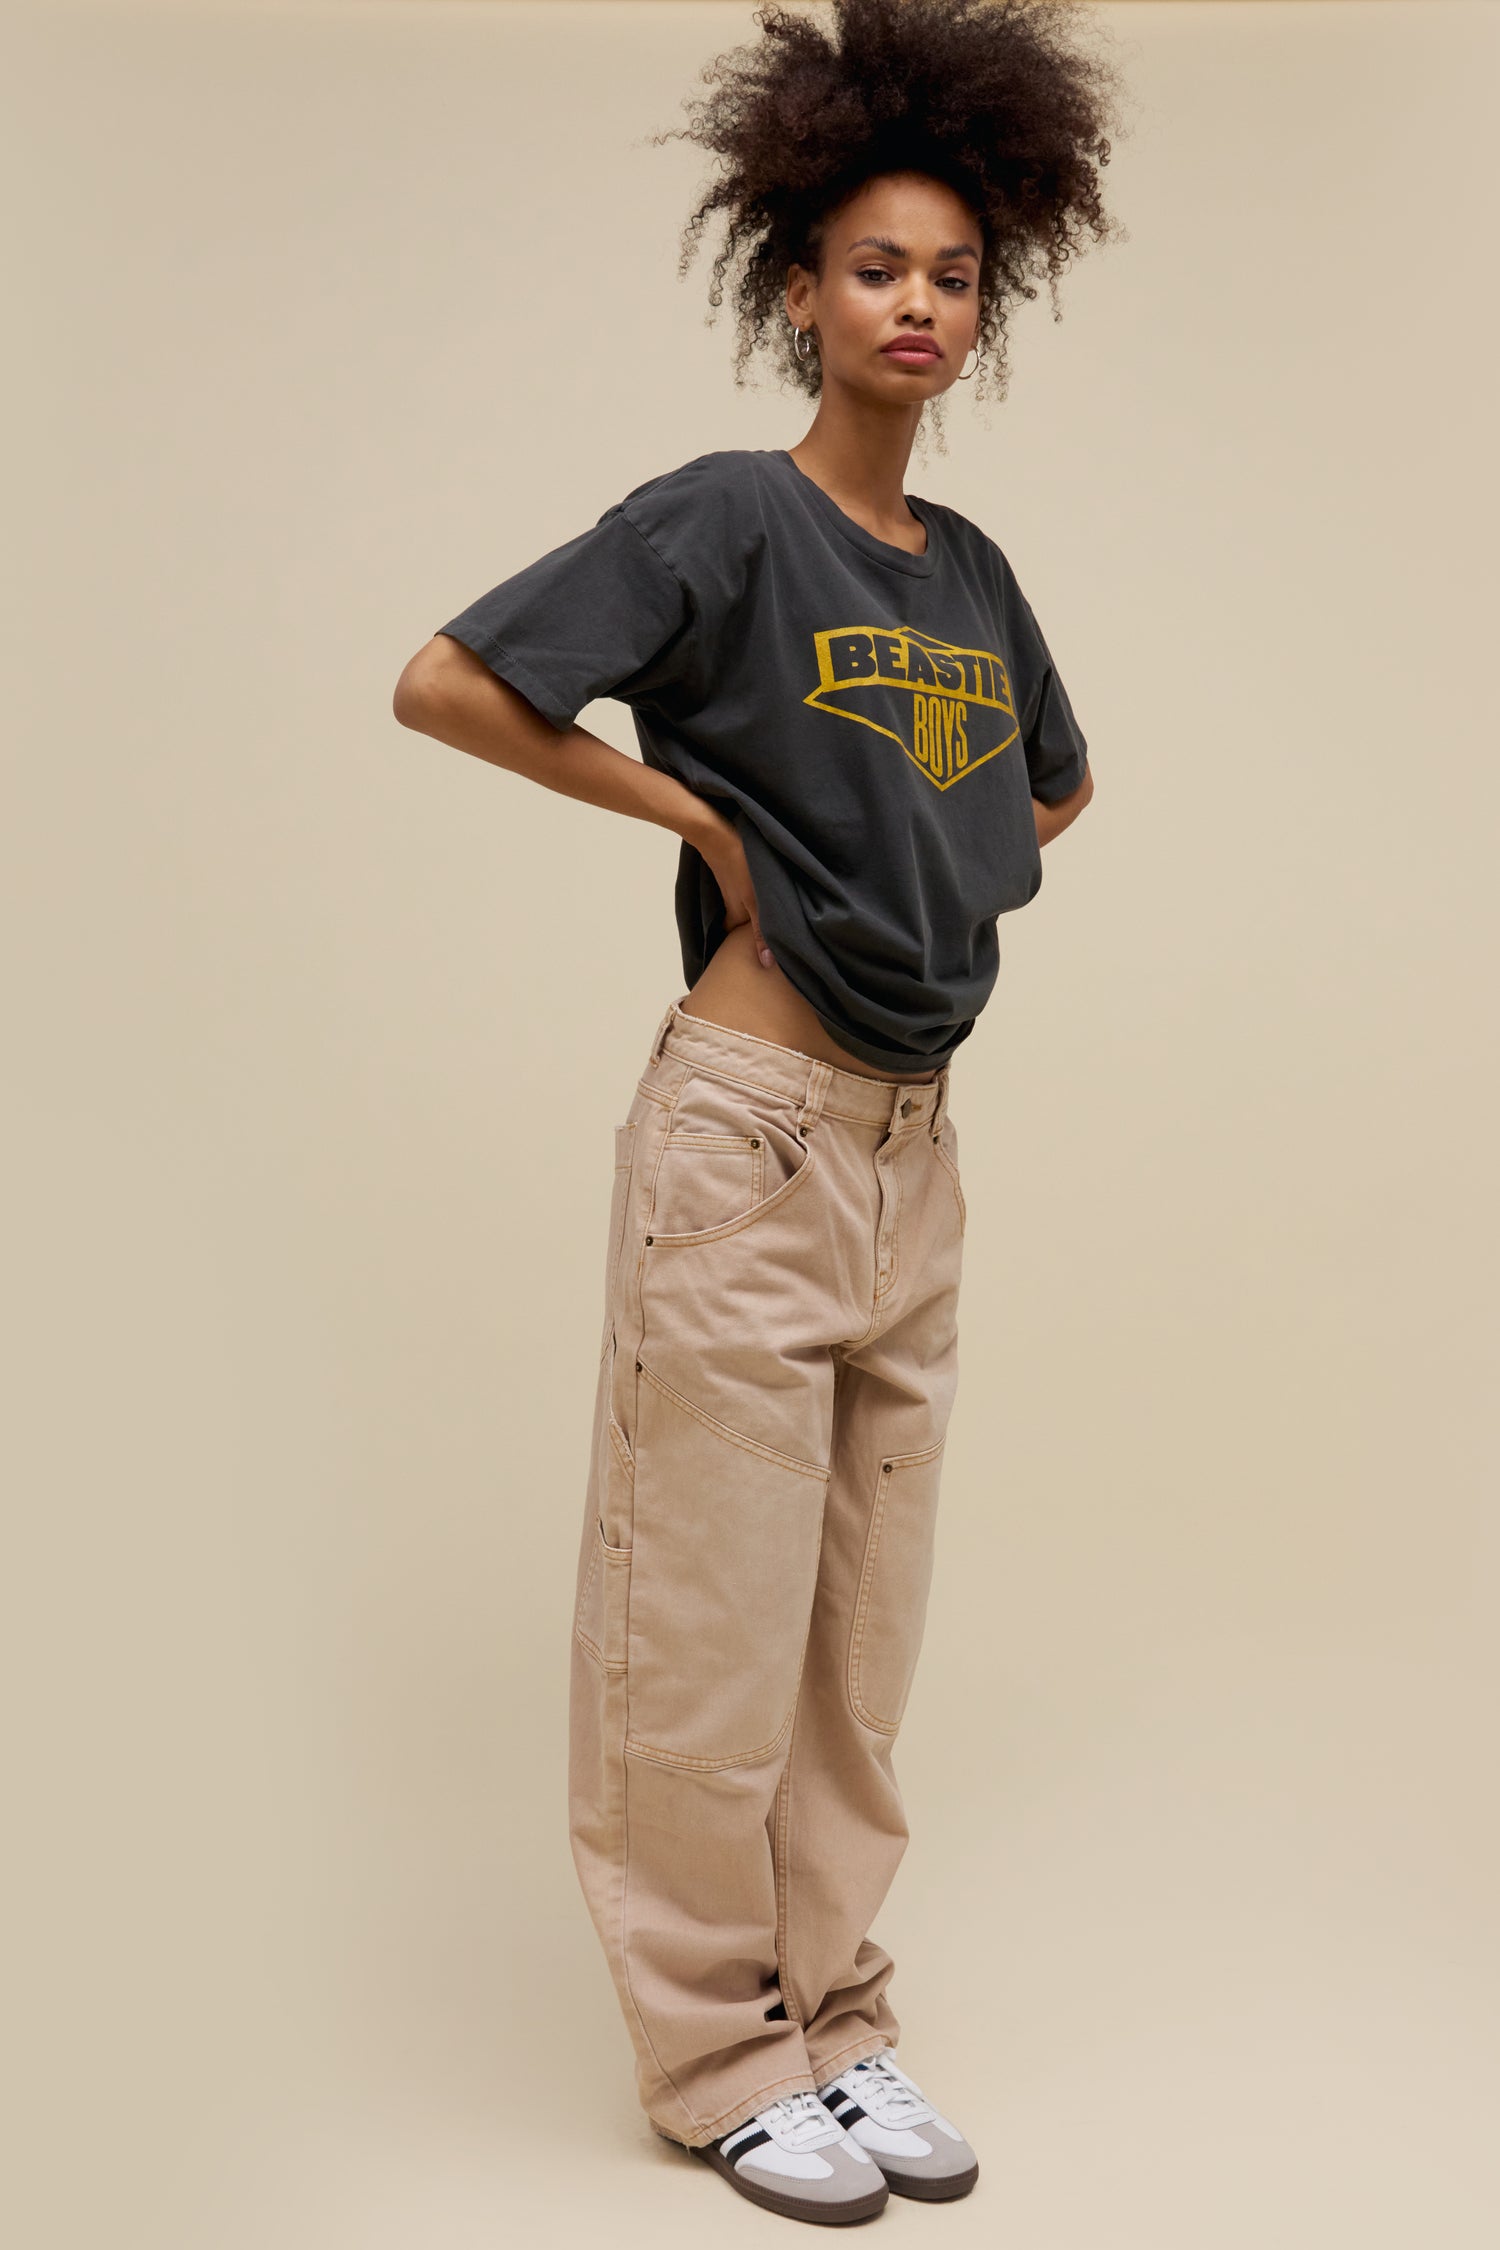 Model wearing a classic Beastie Boys logo graphic tee in pigment dyed black with an oversized fit